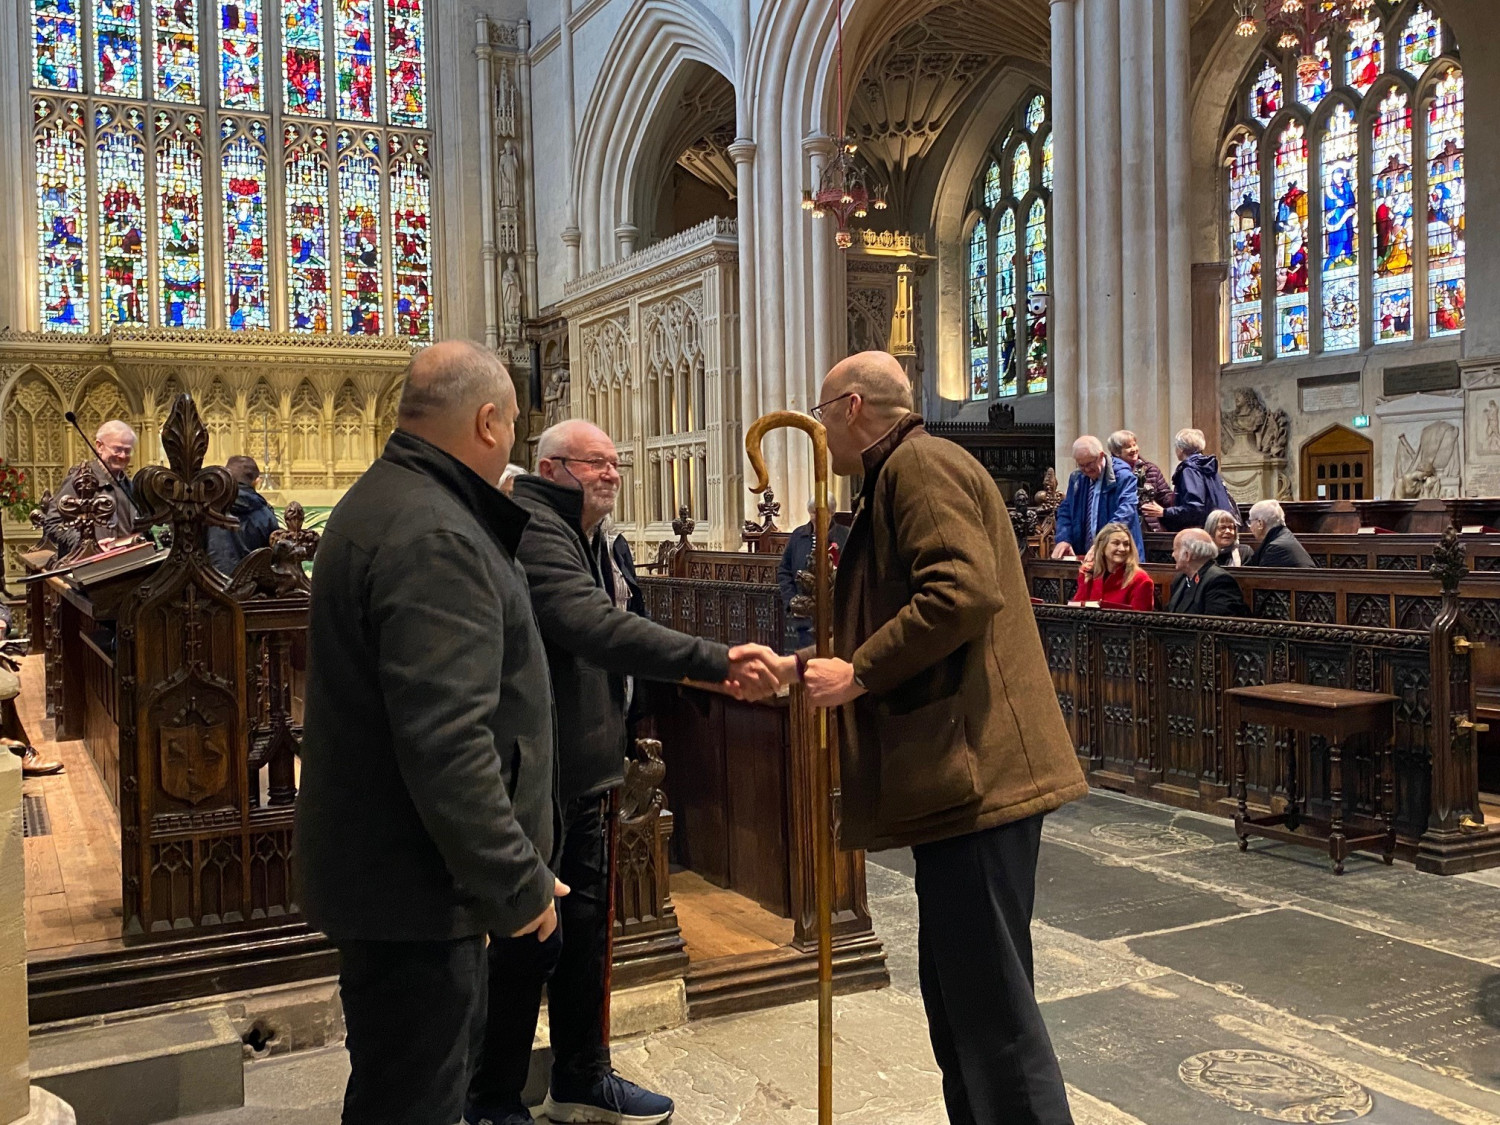 Bishop Michael meeting worshippers at Bath Abbey